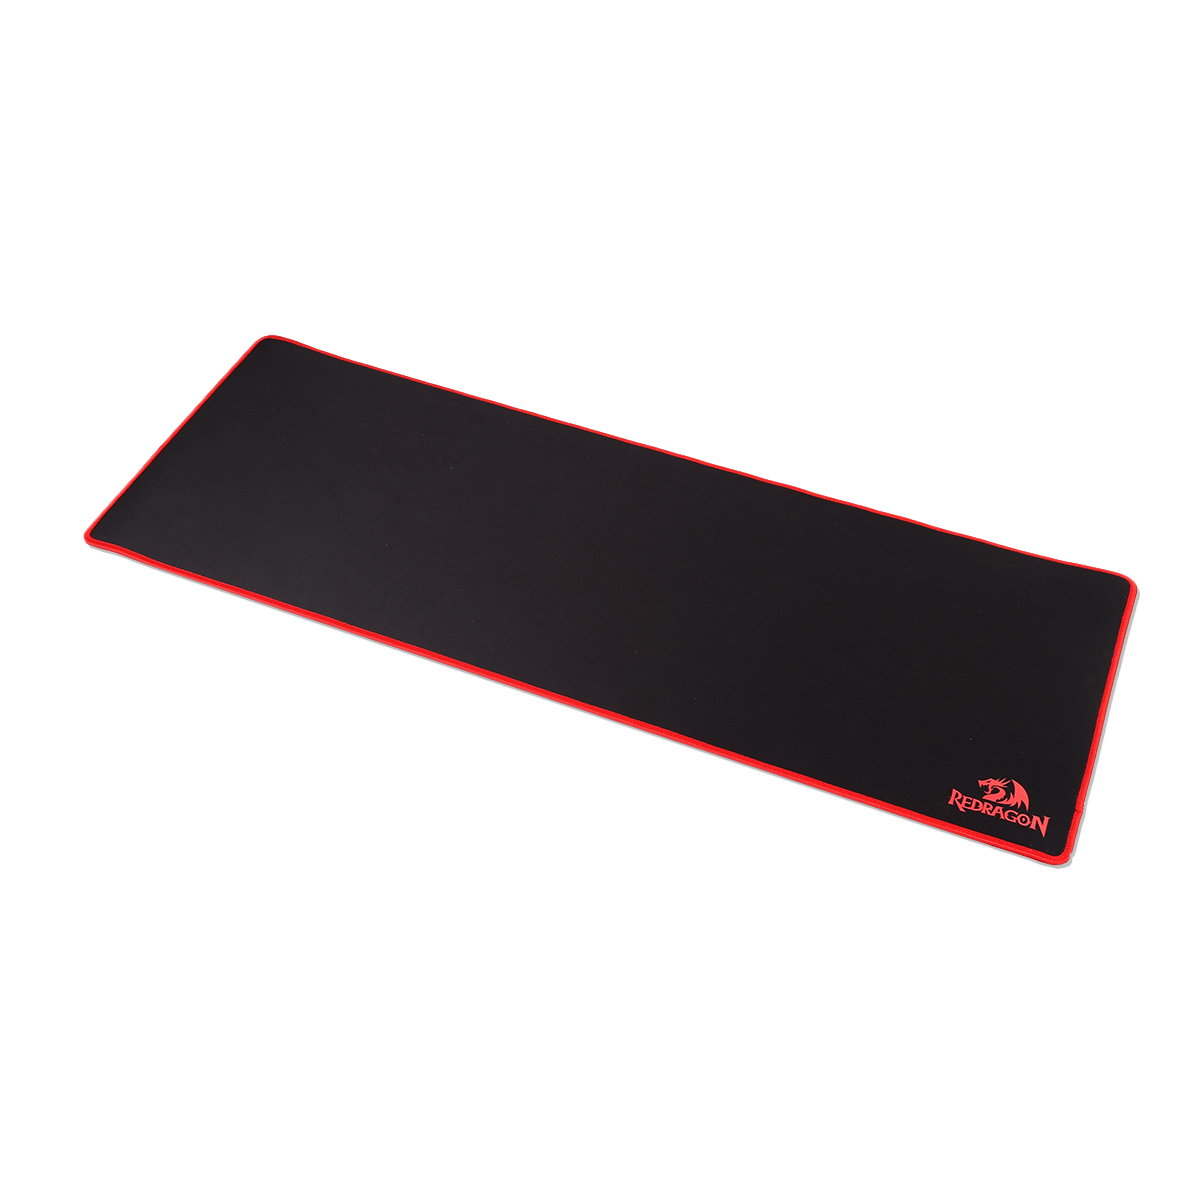 Redragon Gaming Mouse Pad Waterproof Mouse Pad with Non-Slip Rubber Base 80 x 30 cm